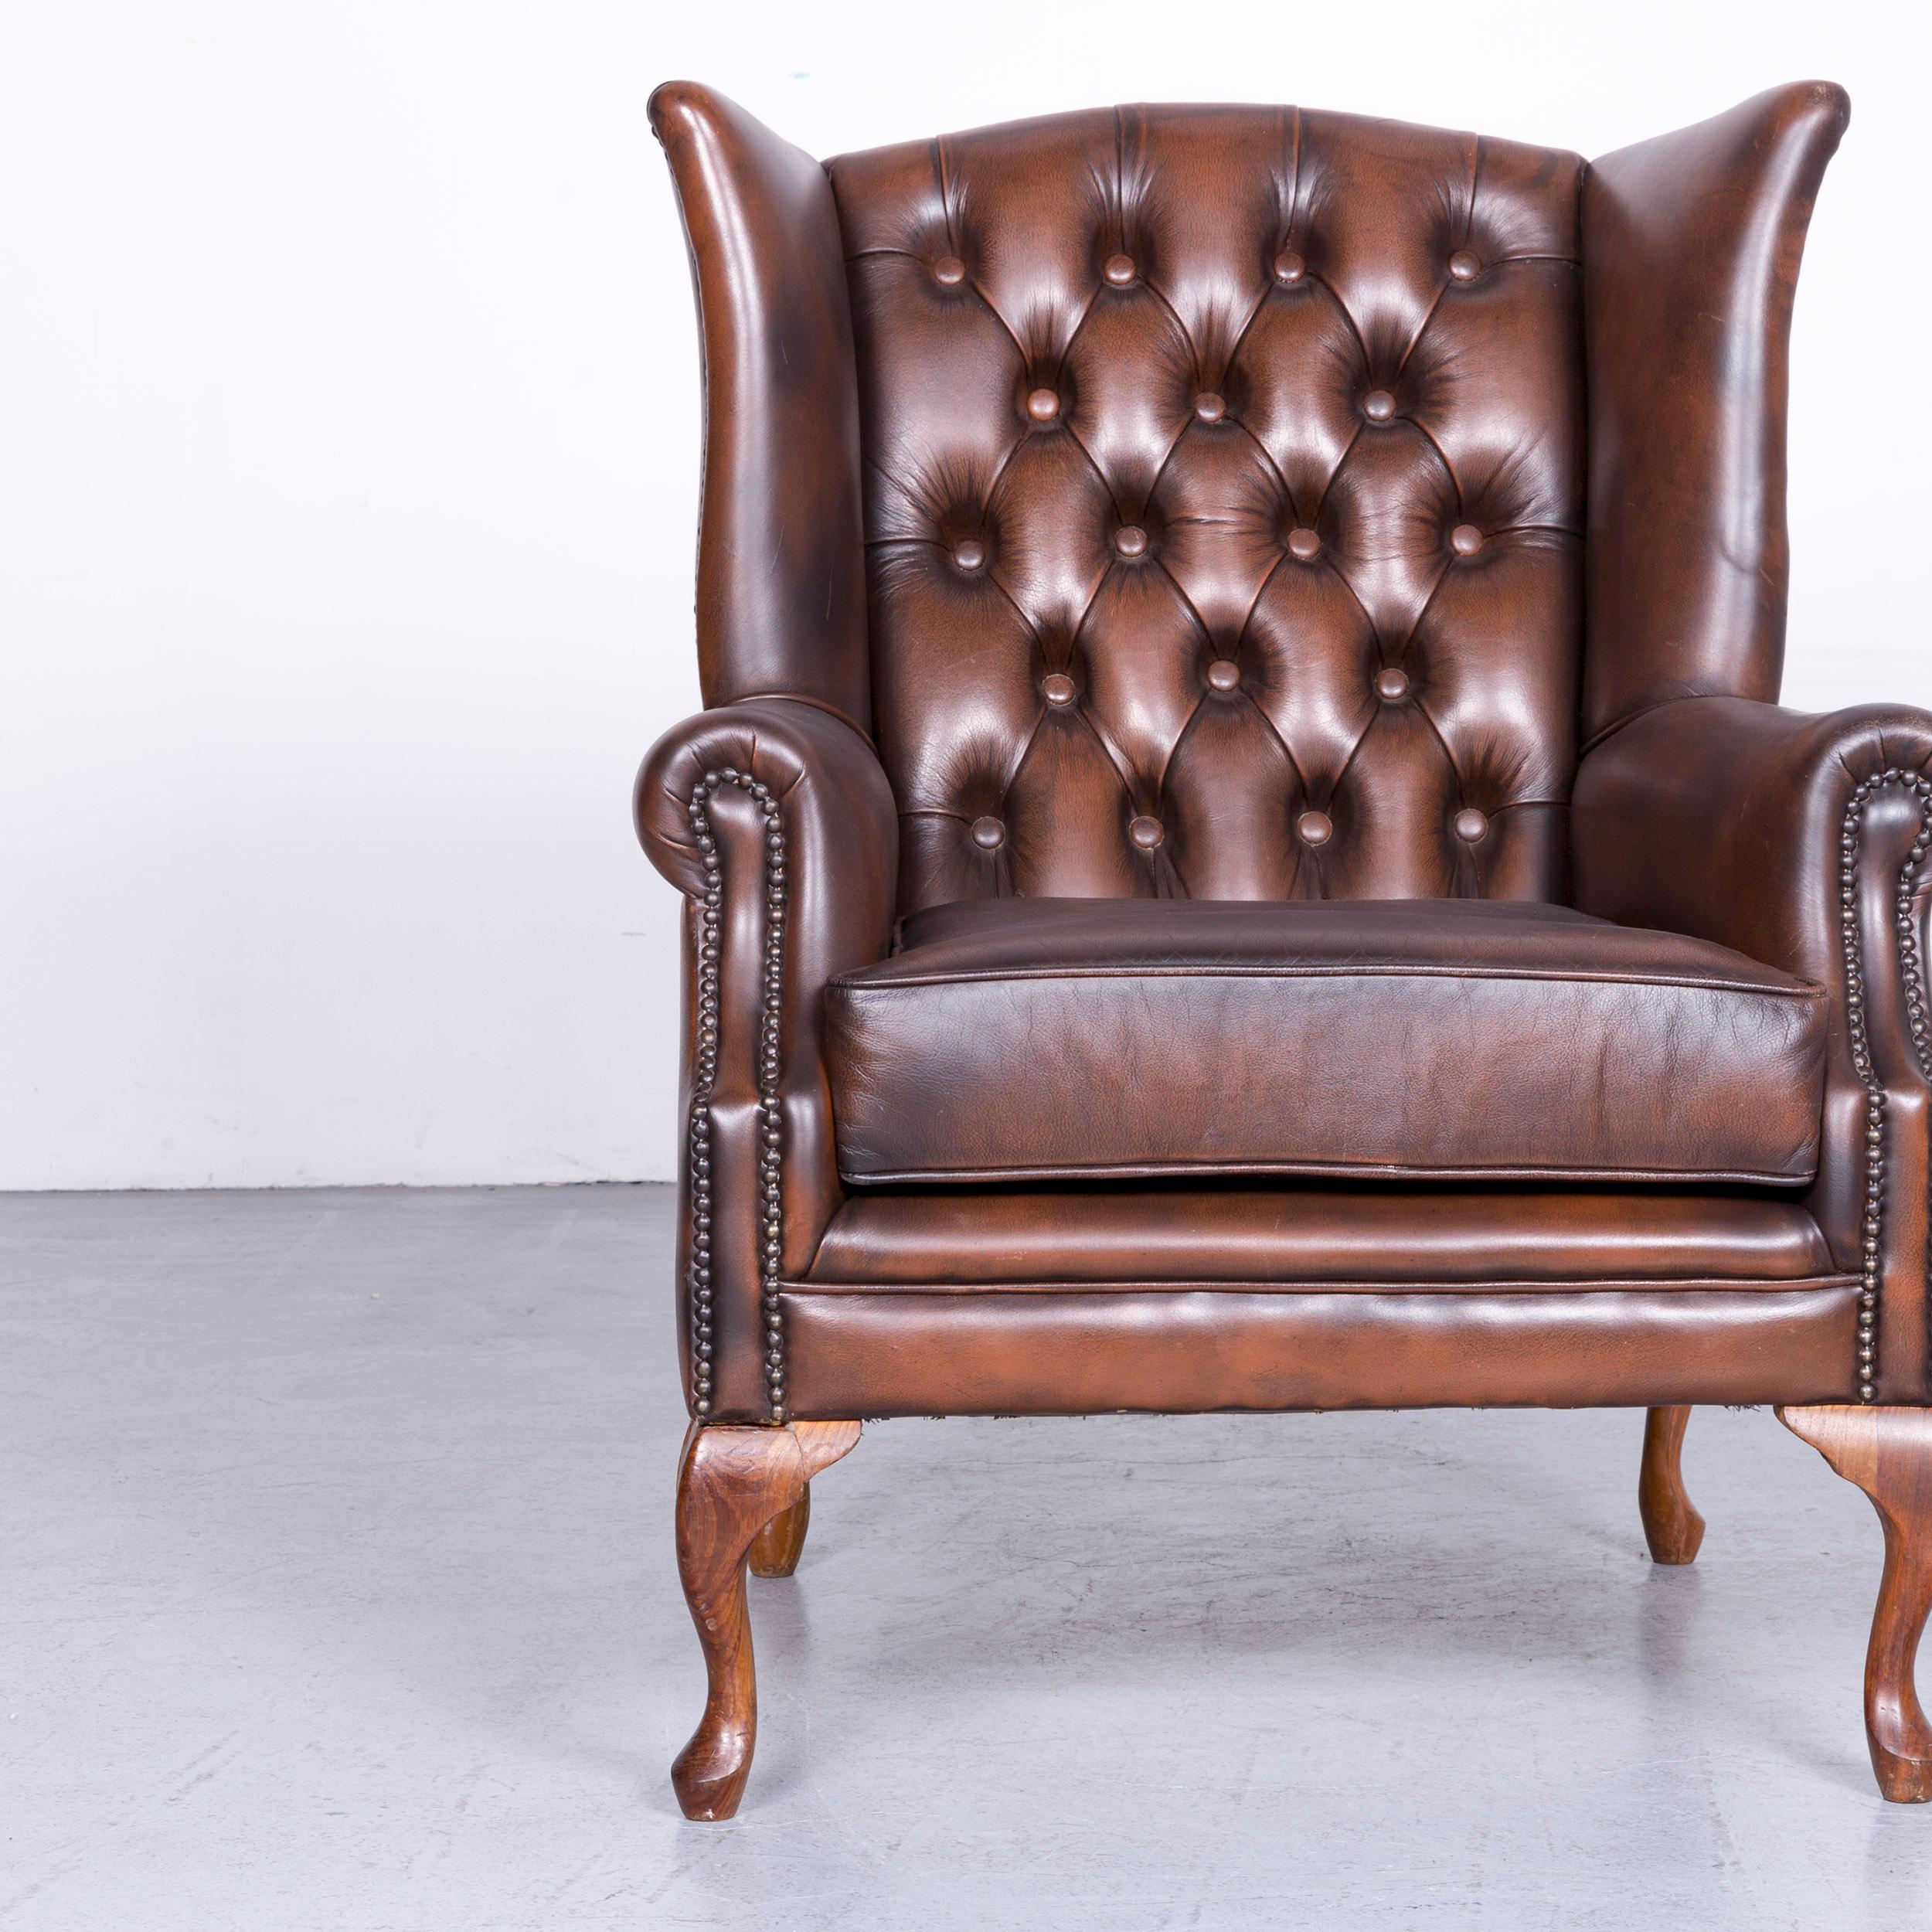 British Vintage Brown Chesterfield Leather Brown Armchair Buttoned Clubchair